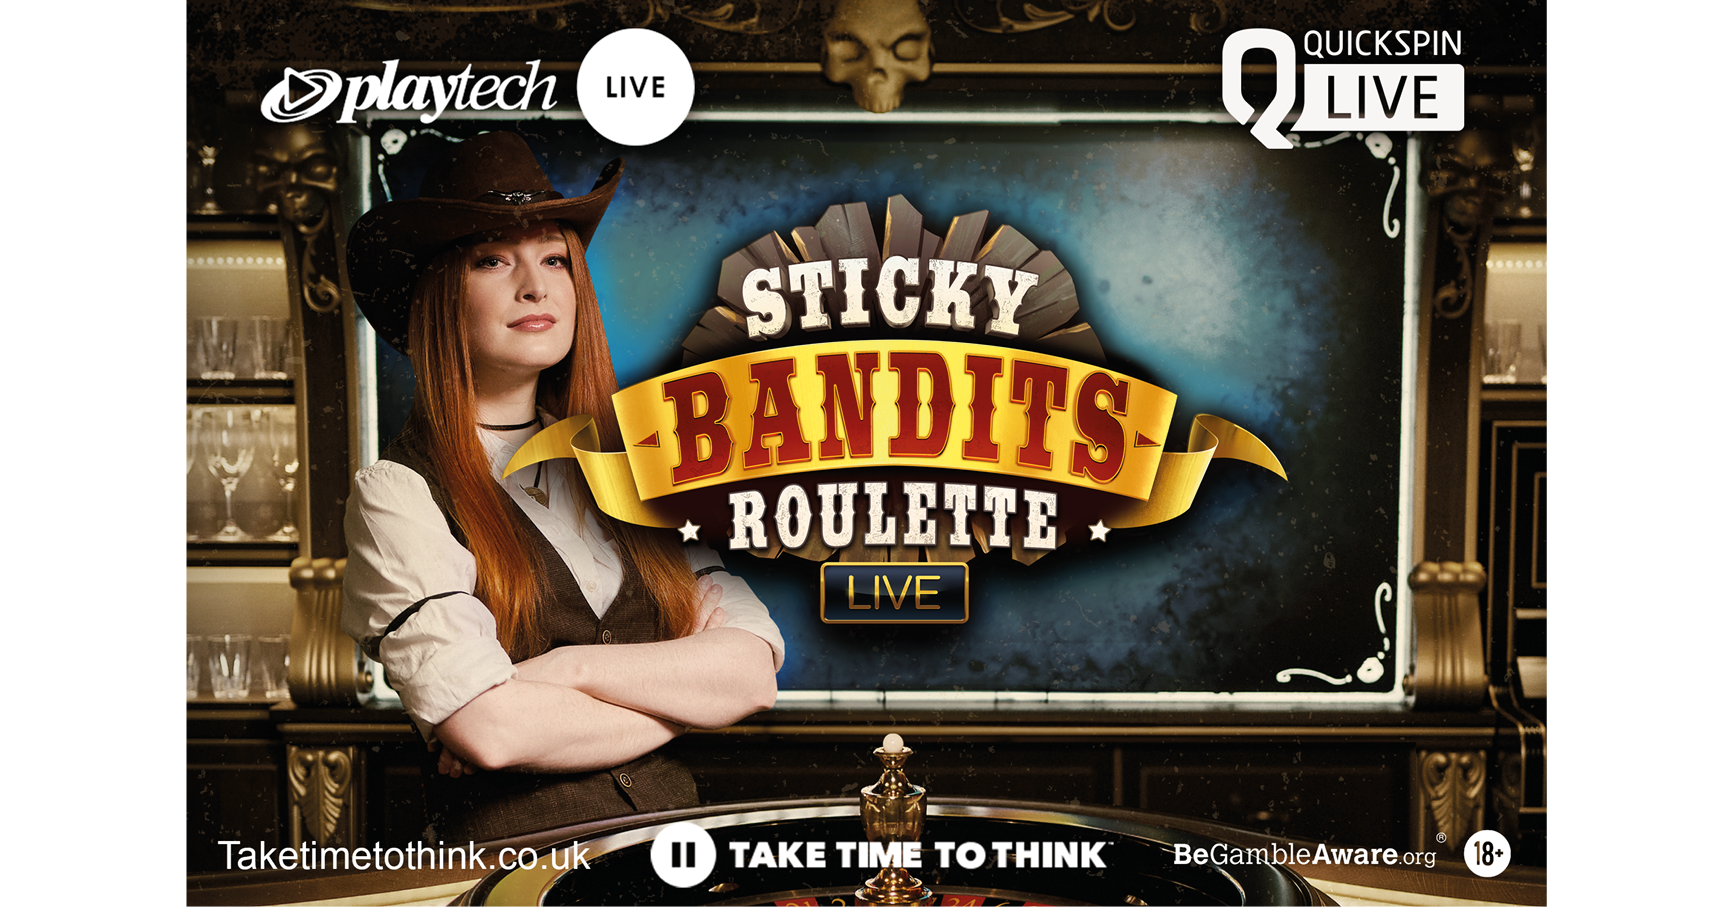 Quickspin Live launch second game Sticky Bandits Roulette Live